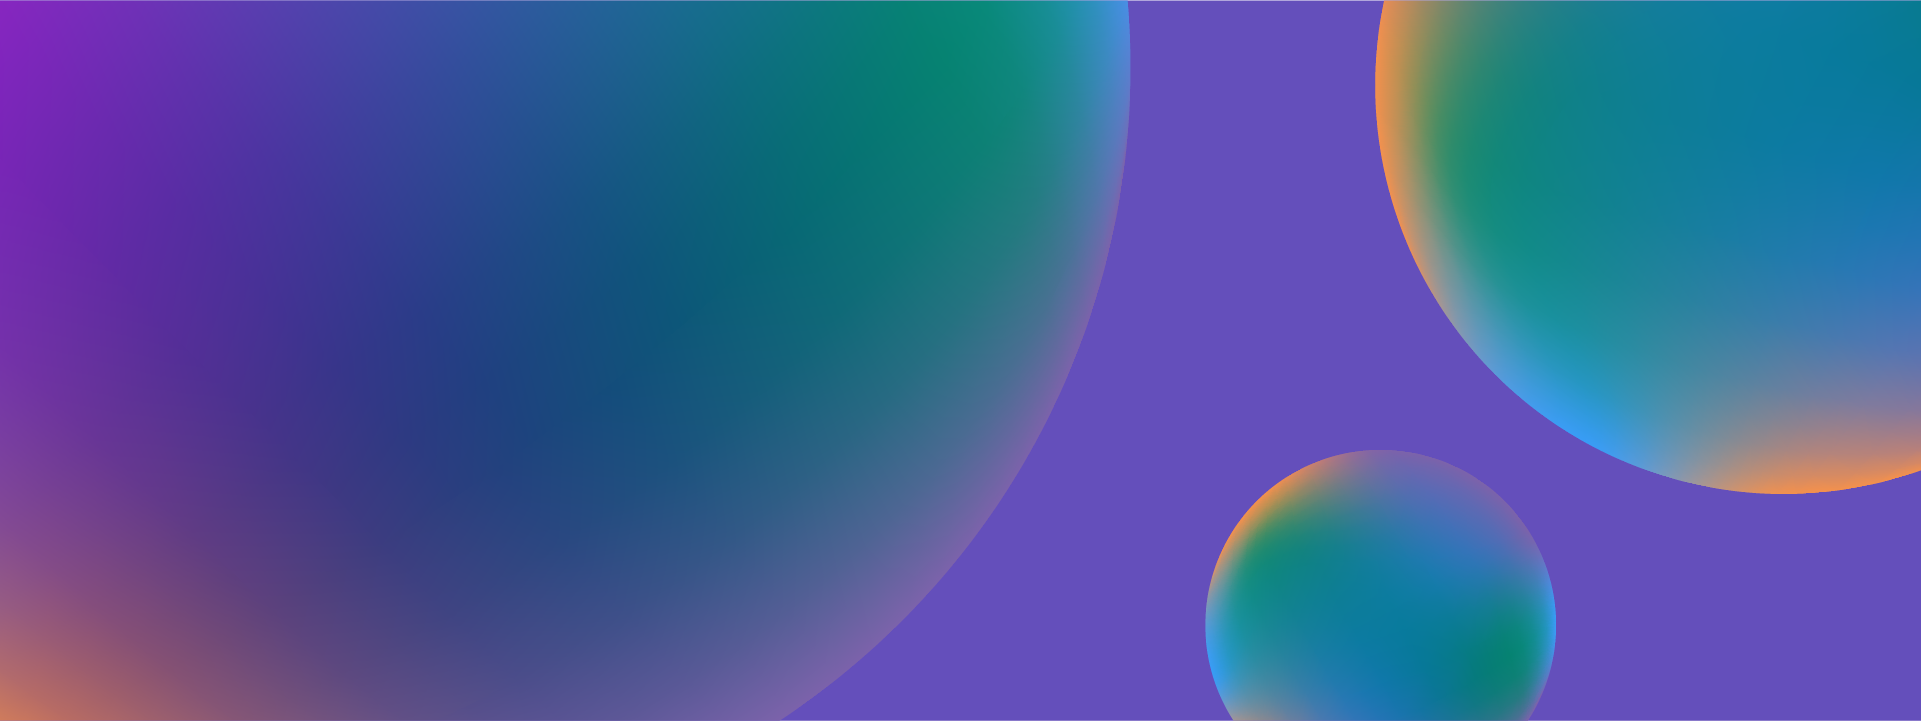 abstract multi-colored bubbles on a purple background